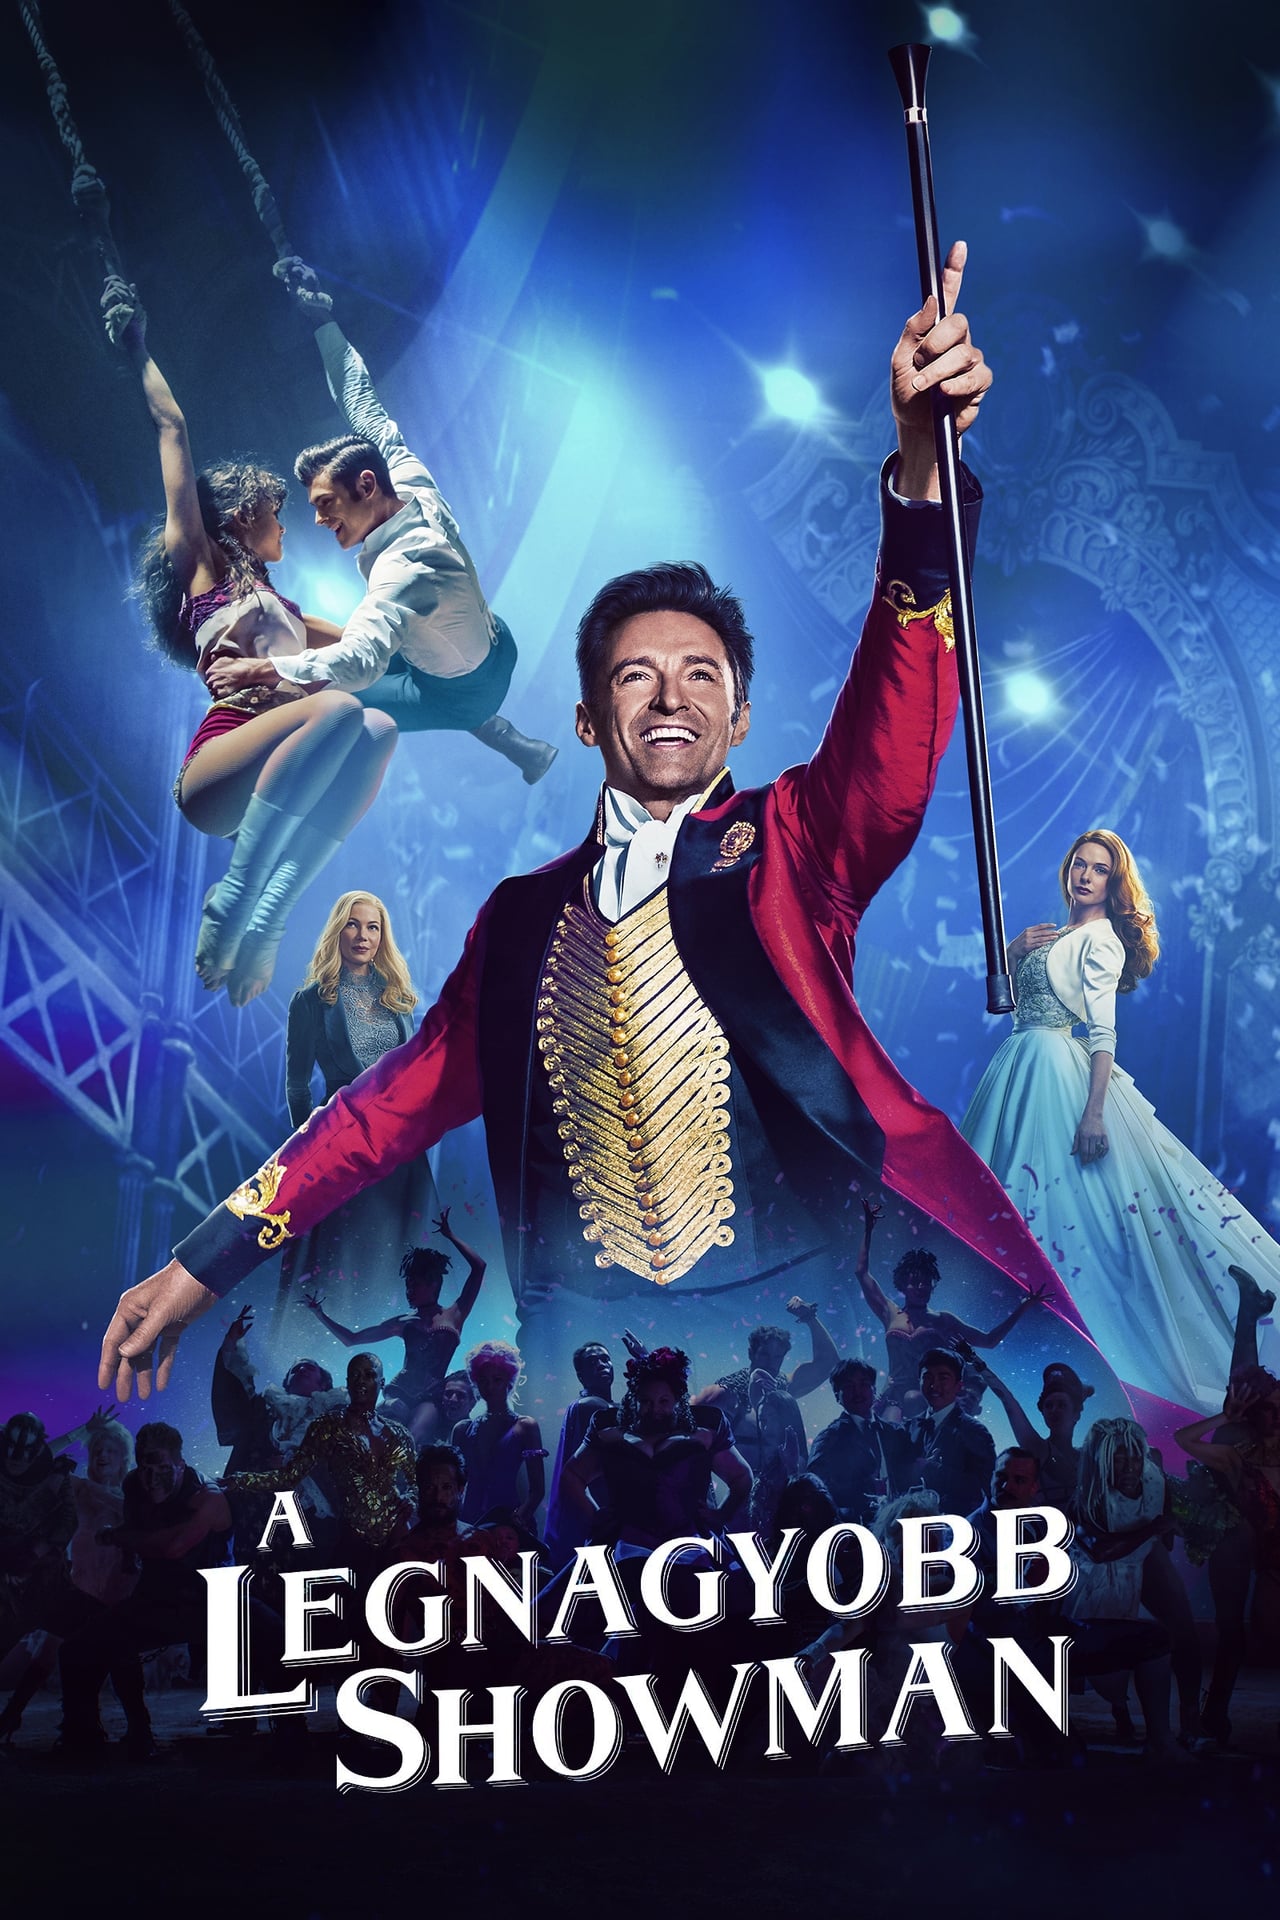 the greatest showman free download